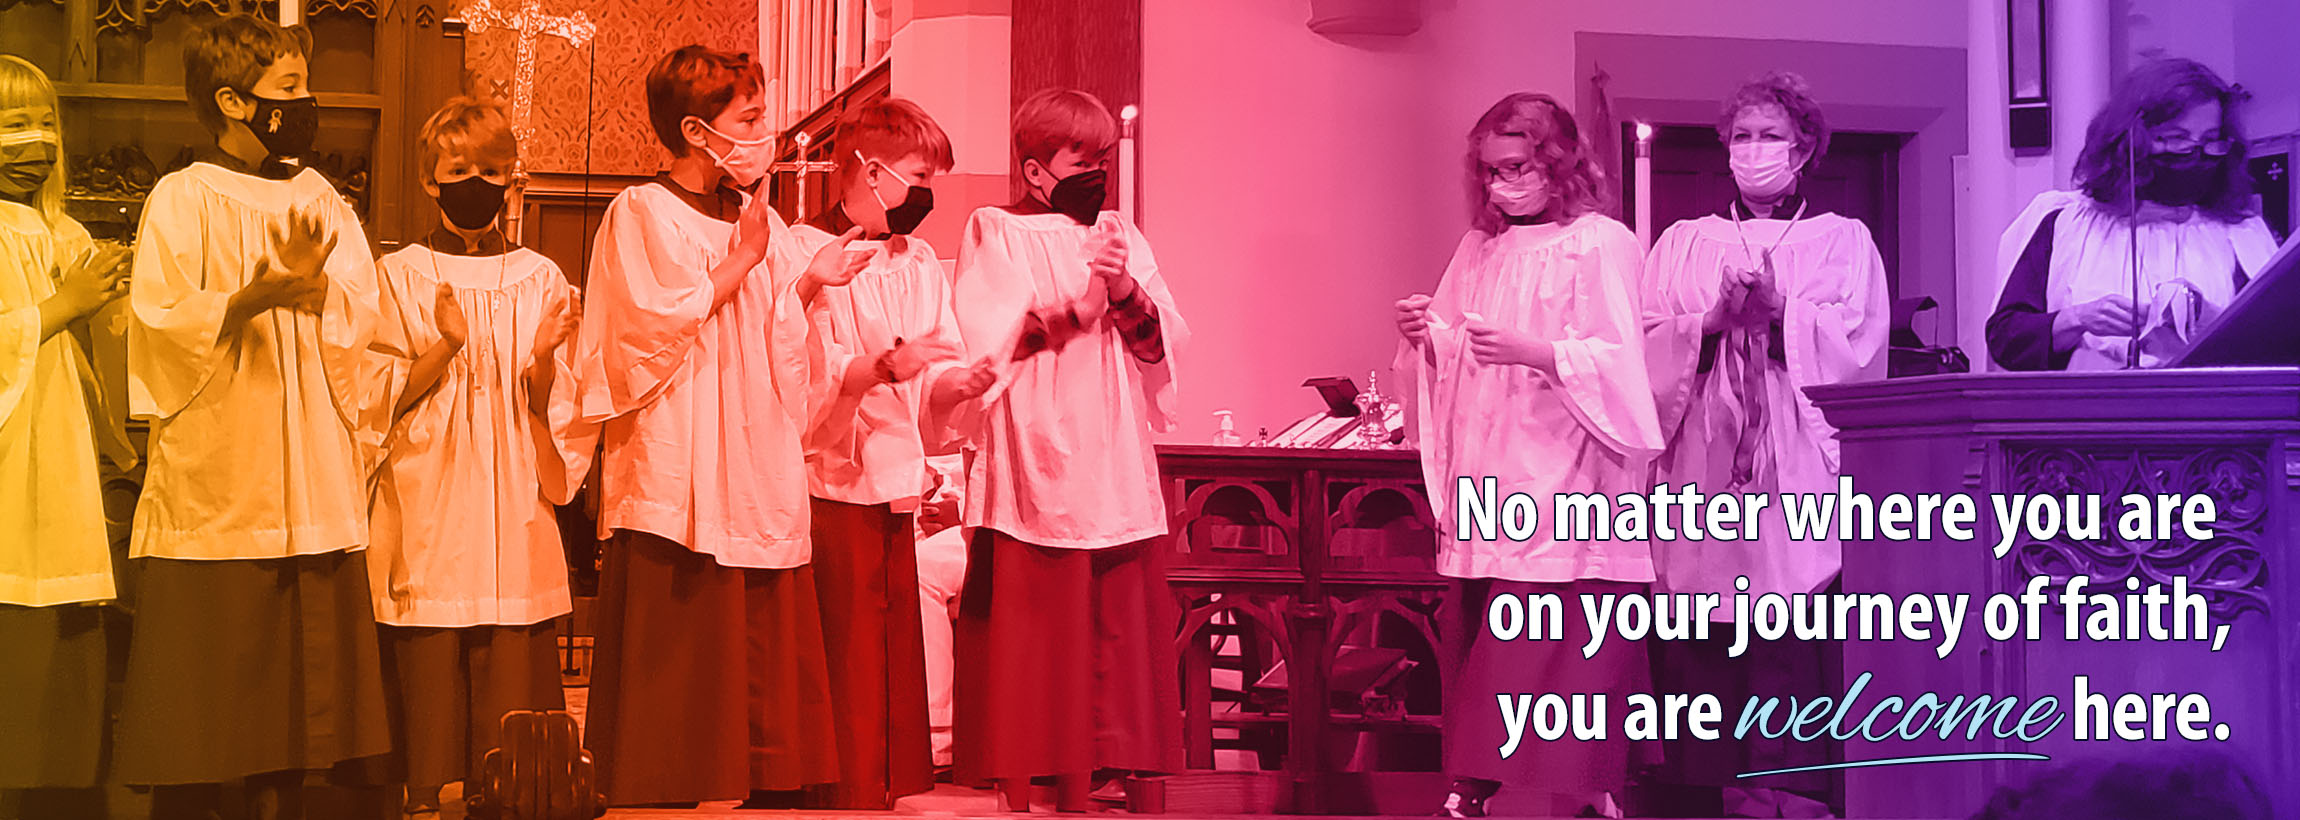 Acolytes with Candles at Easter with 'You are welcome here' text overlay